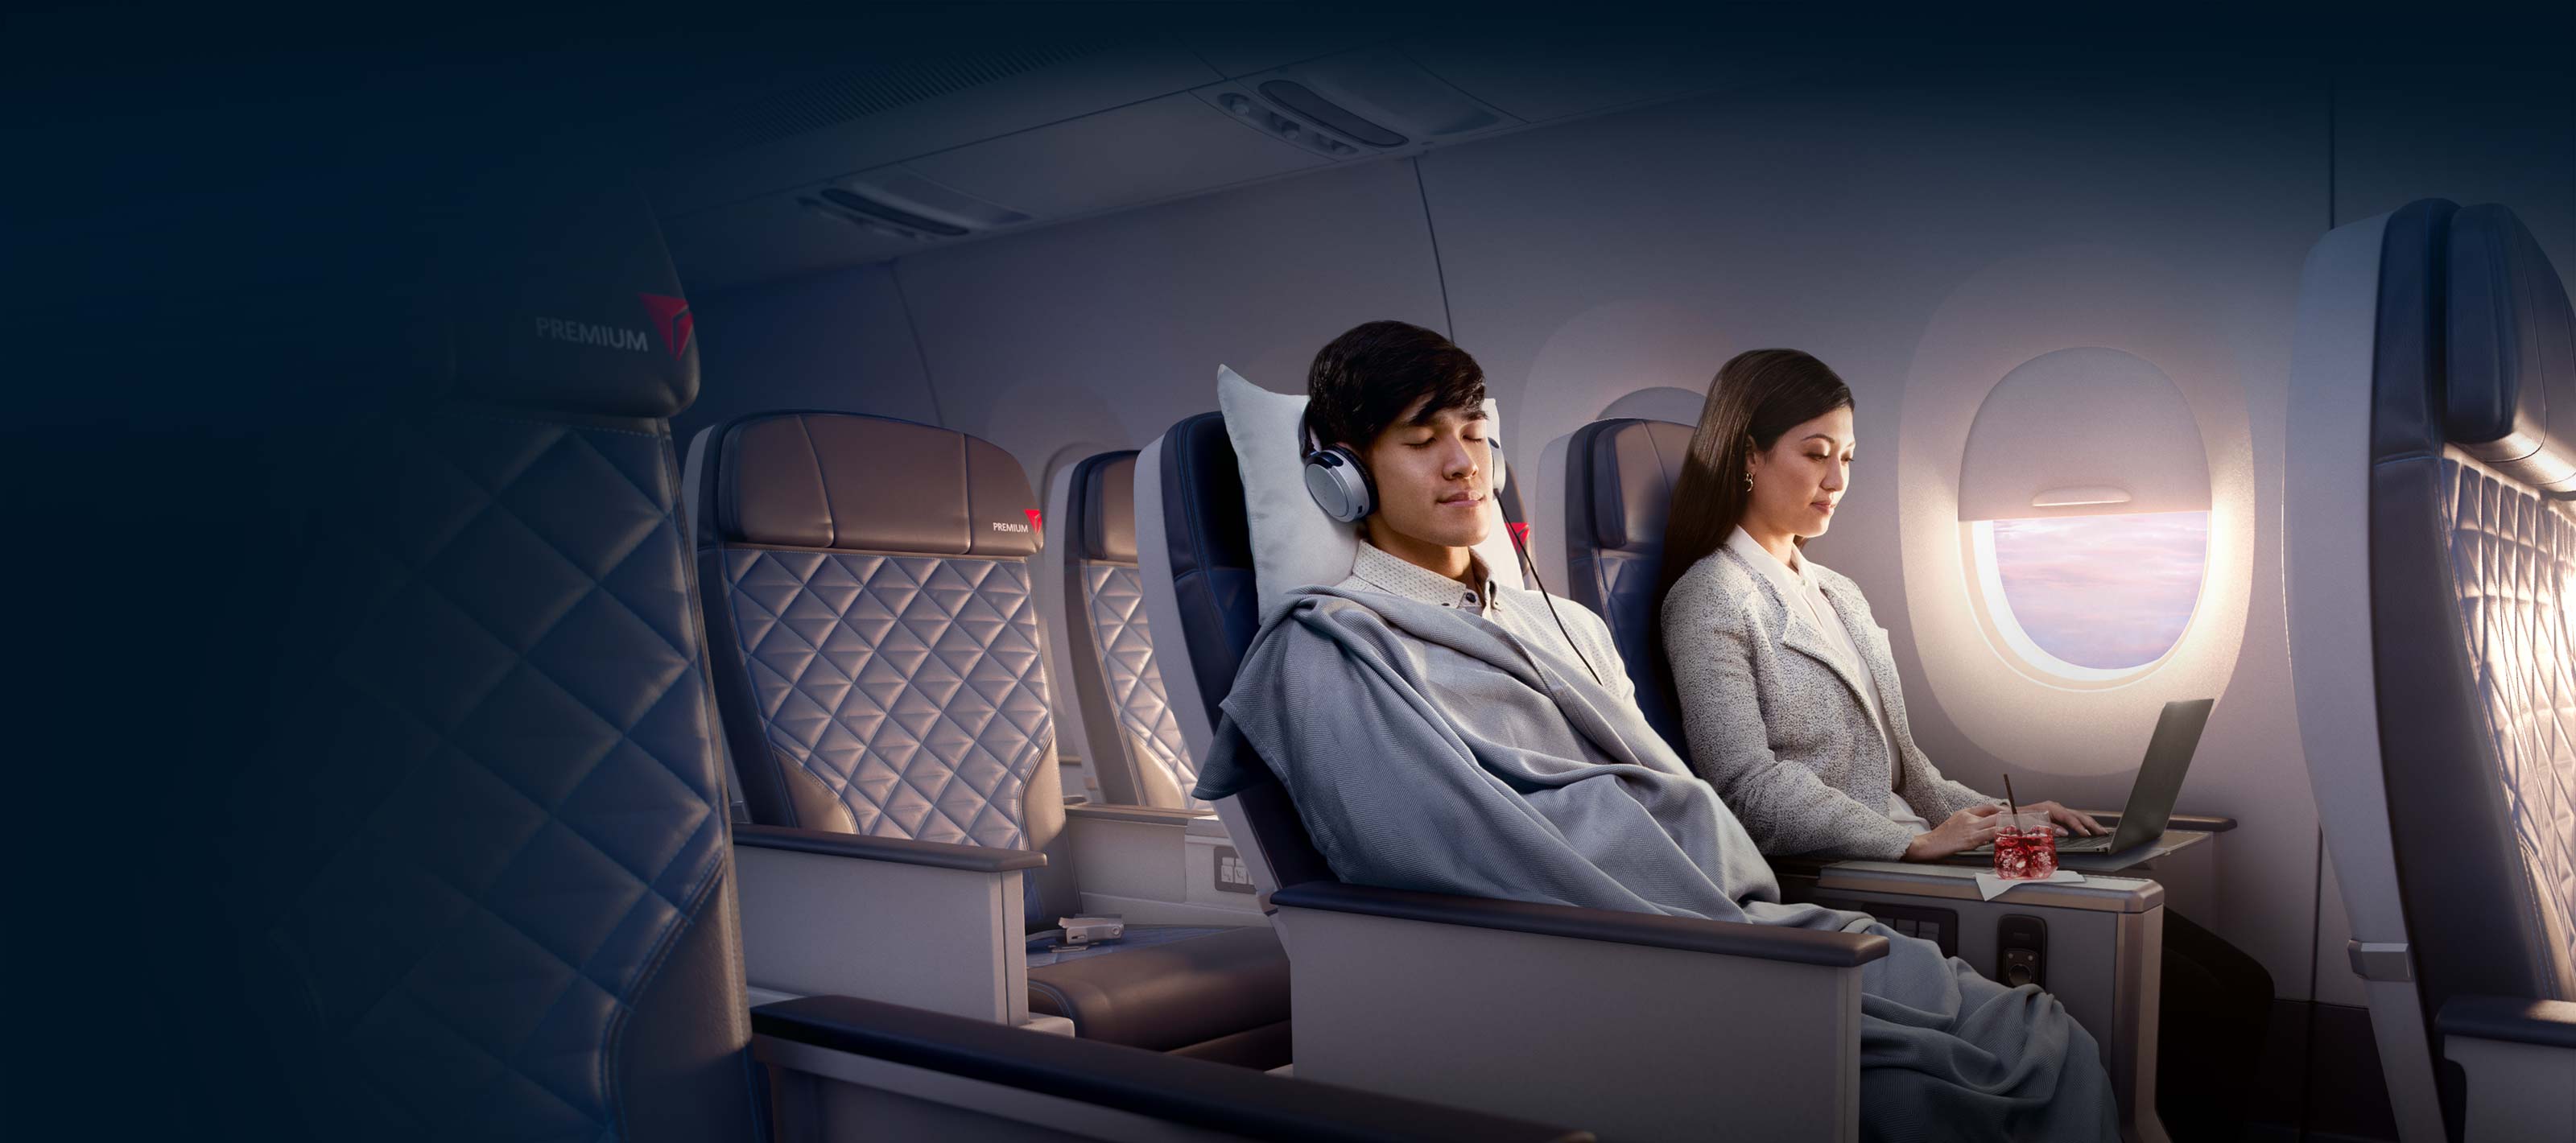 Why I M Not Excited About Delta S Flagship Interior Updates